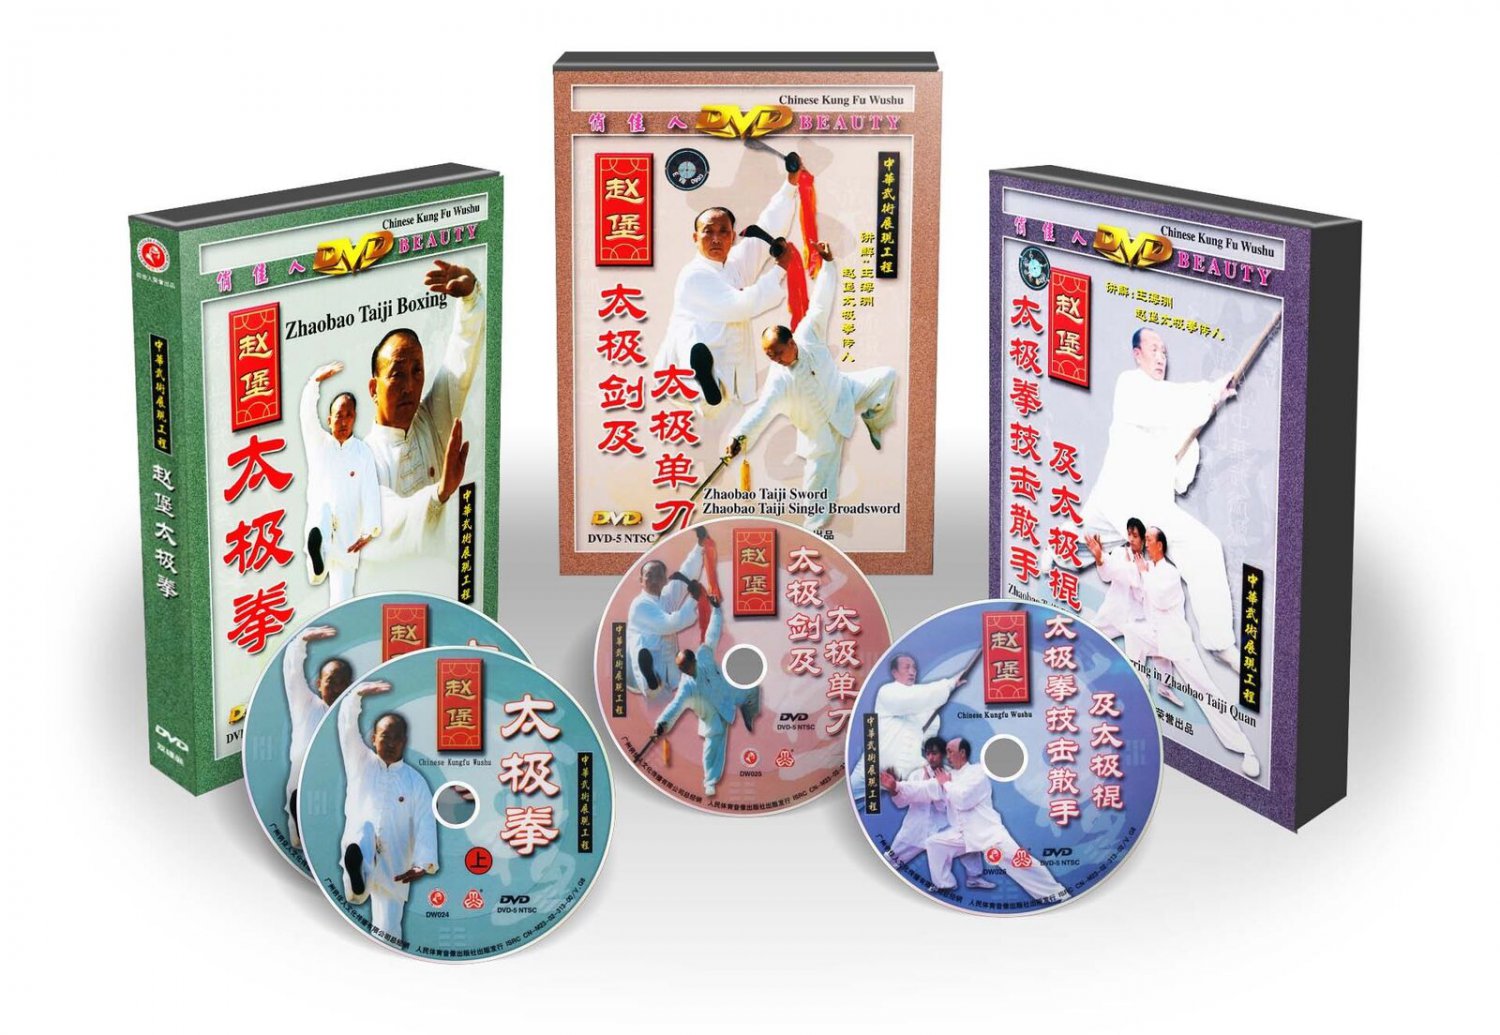 Zhaobao Style Tai Chi Series -  Taiji Boxing - Sword and boradsword 4DVDs